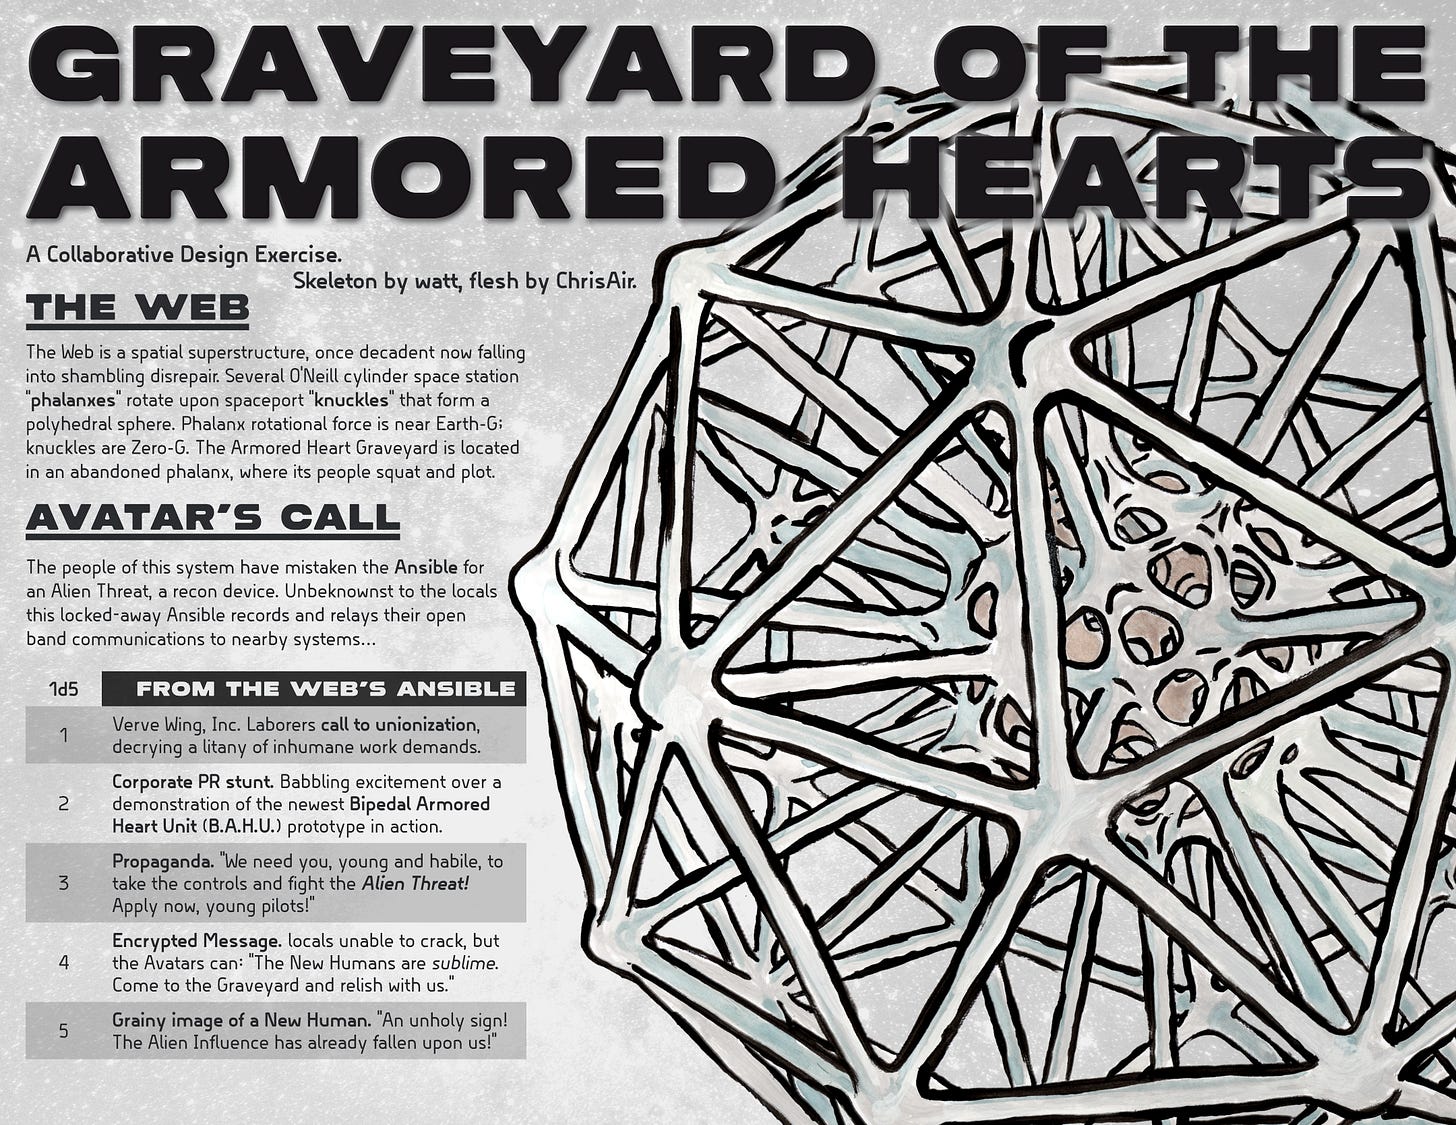 The intro spread with a skeletal-looking polyhedral sphere of connected cylinders and spheres.